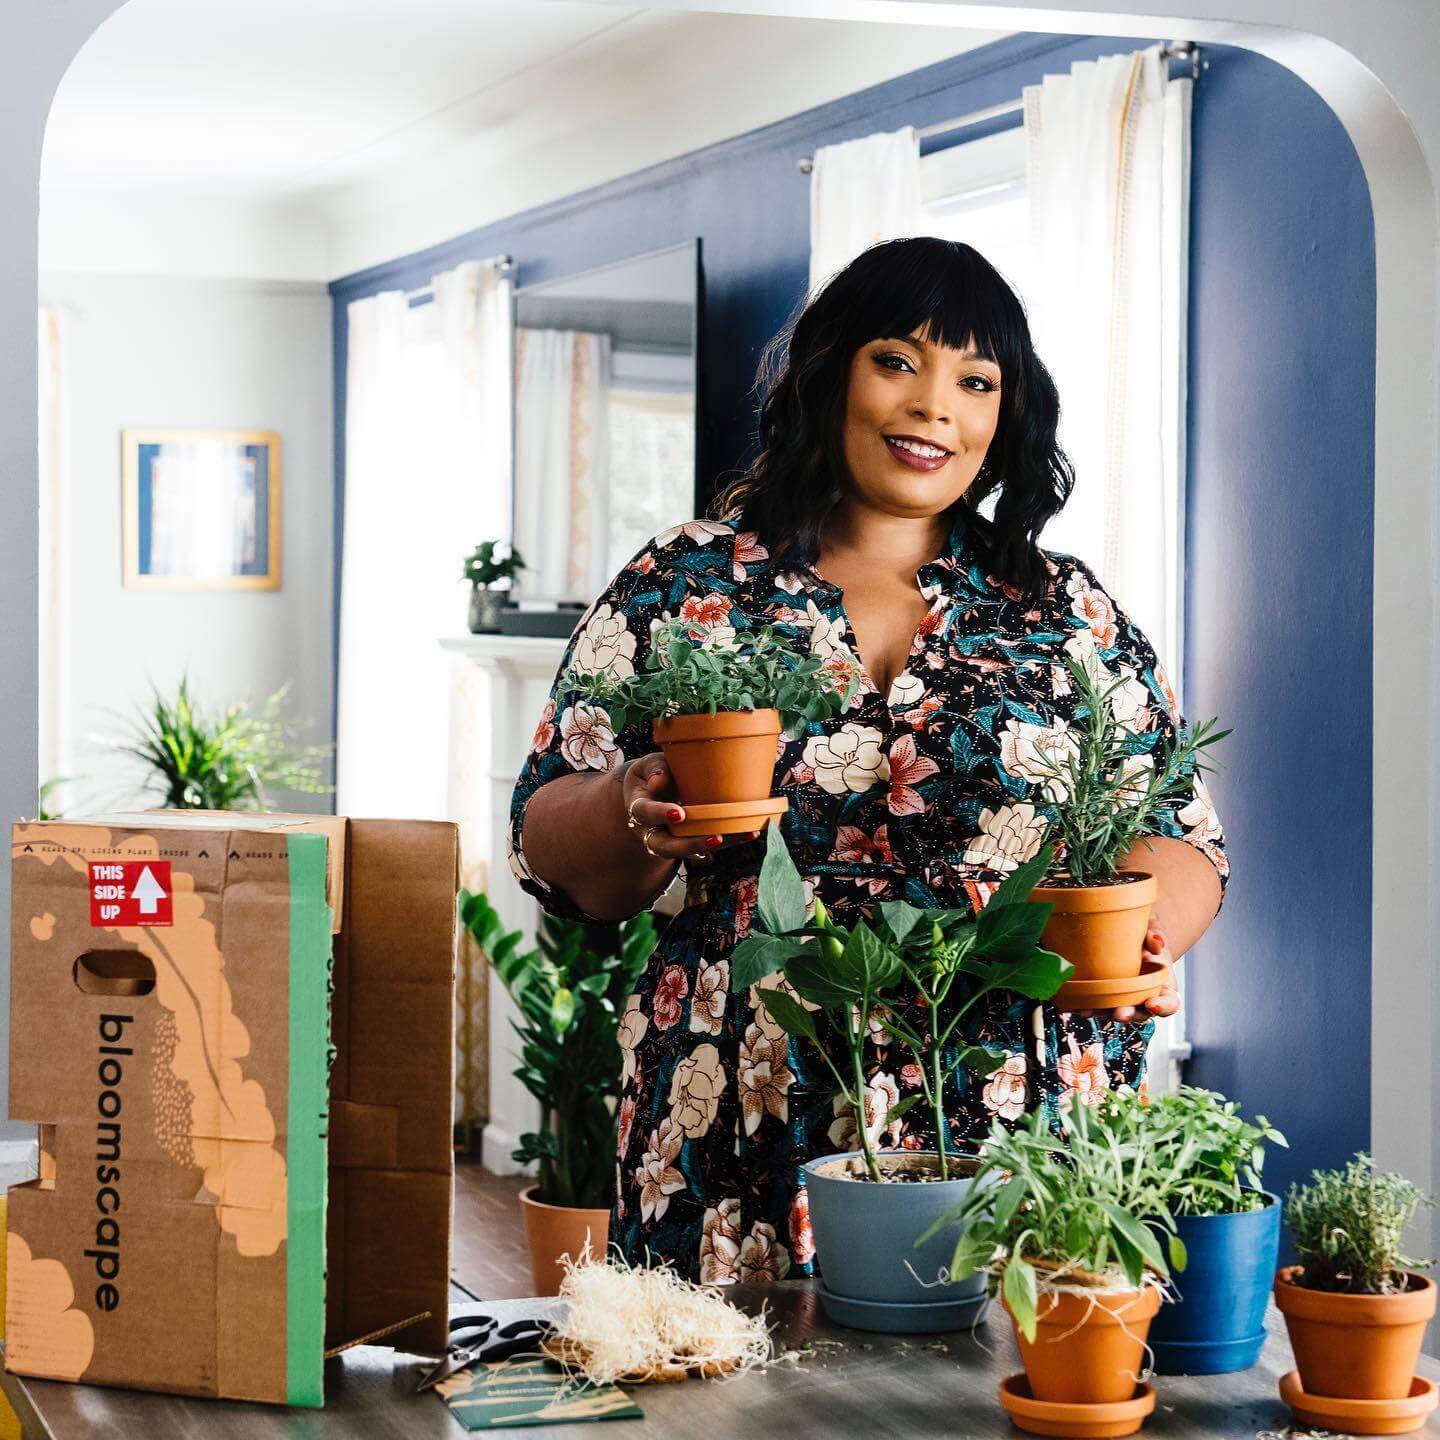 Food blogger Angela Davis unboxes a Bloomscape Aromatic Herb collection in her home kitchen